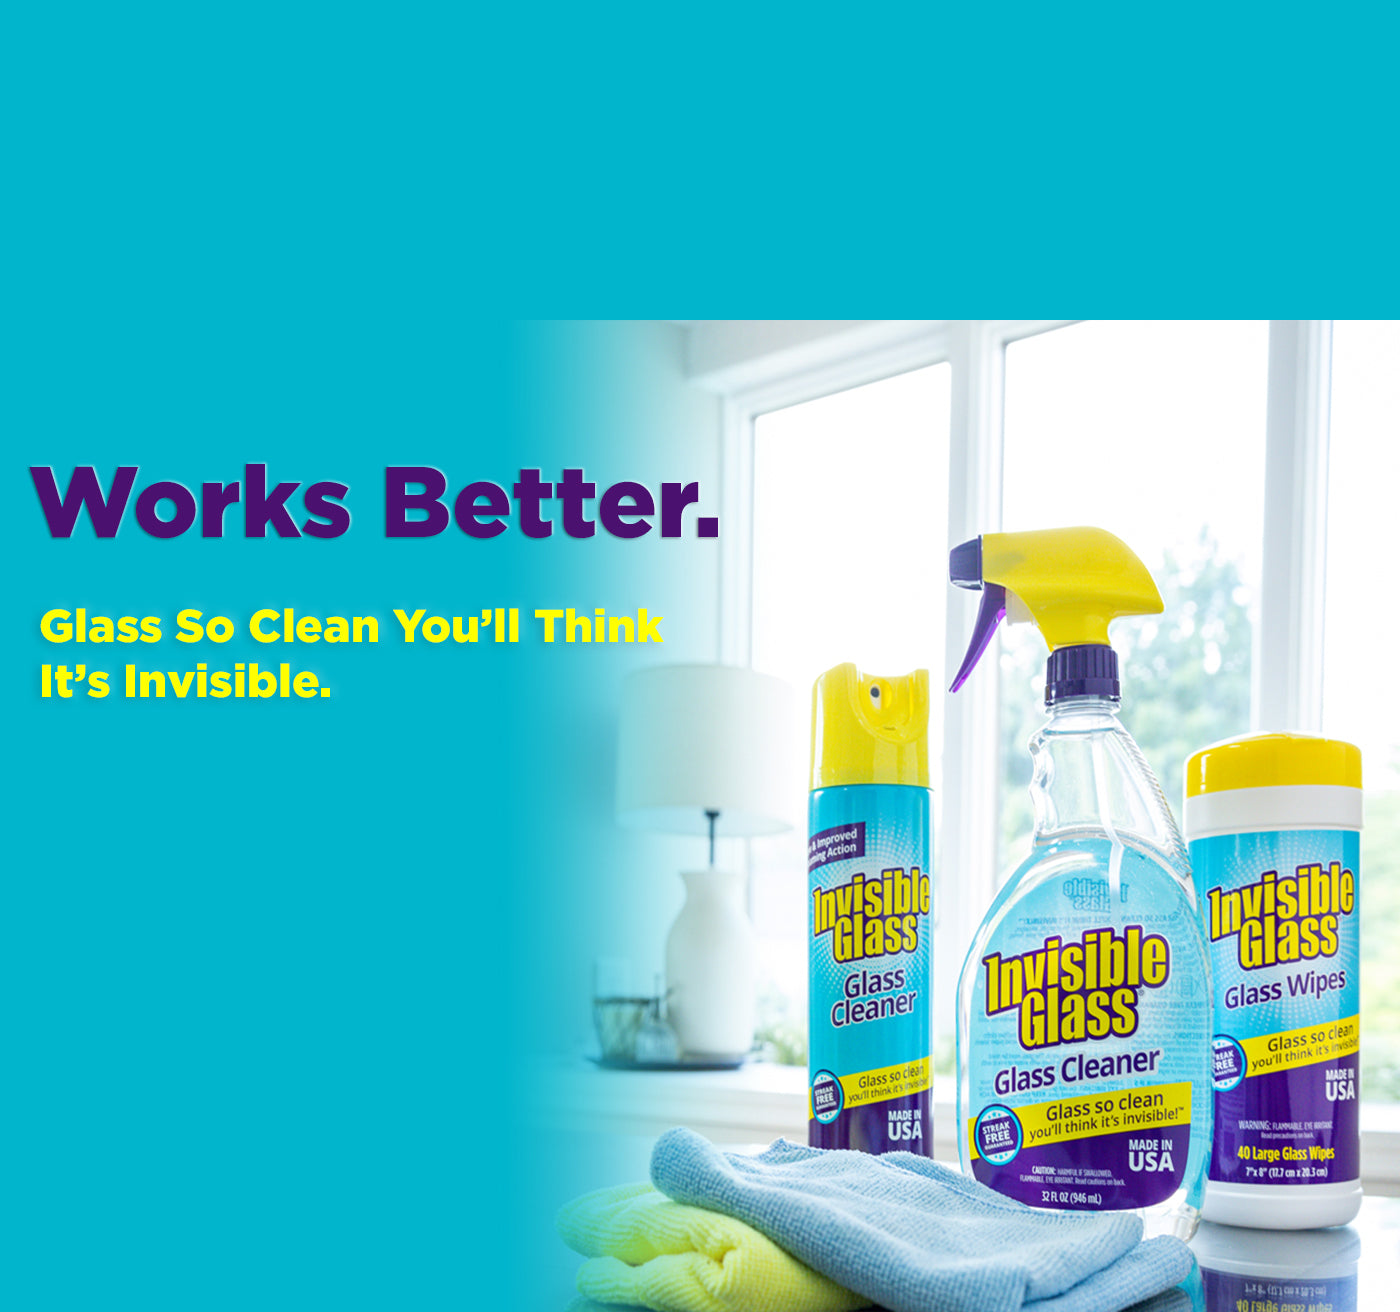 Invisible Glass 92164-3PK 22-Ounce Premium Glass Cleaner and Window Spray  for Auto and Home Streak-Free Shine on Windows, Windshields, and Mirrors is